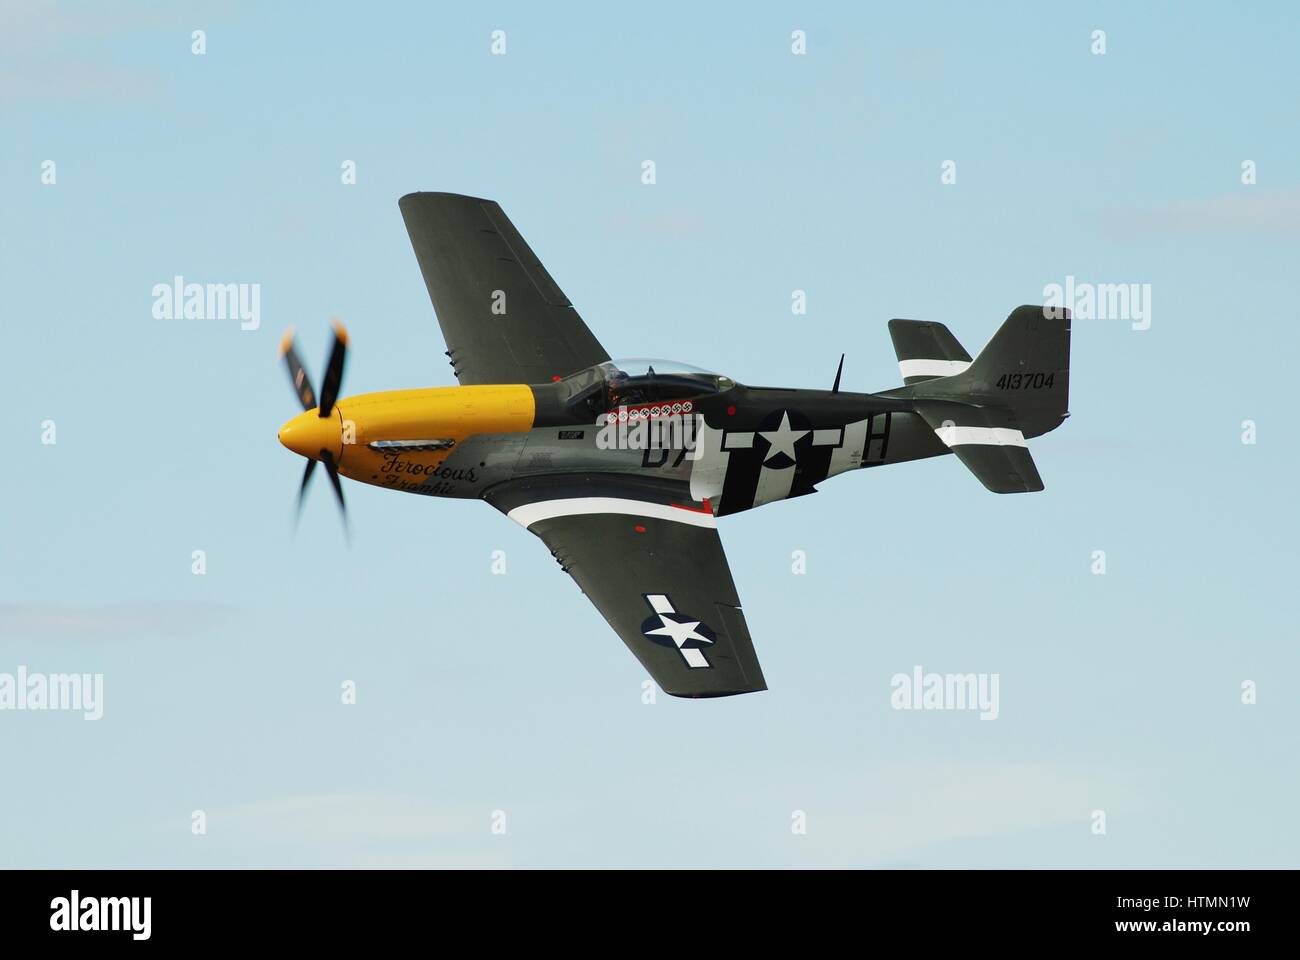 Mustang P-51D fighter plane Ferocious Frankie displays at the Dunsfold airshow in Surrey, England. The Second World War aircraft was built in 1944. Stock Photo